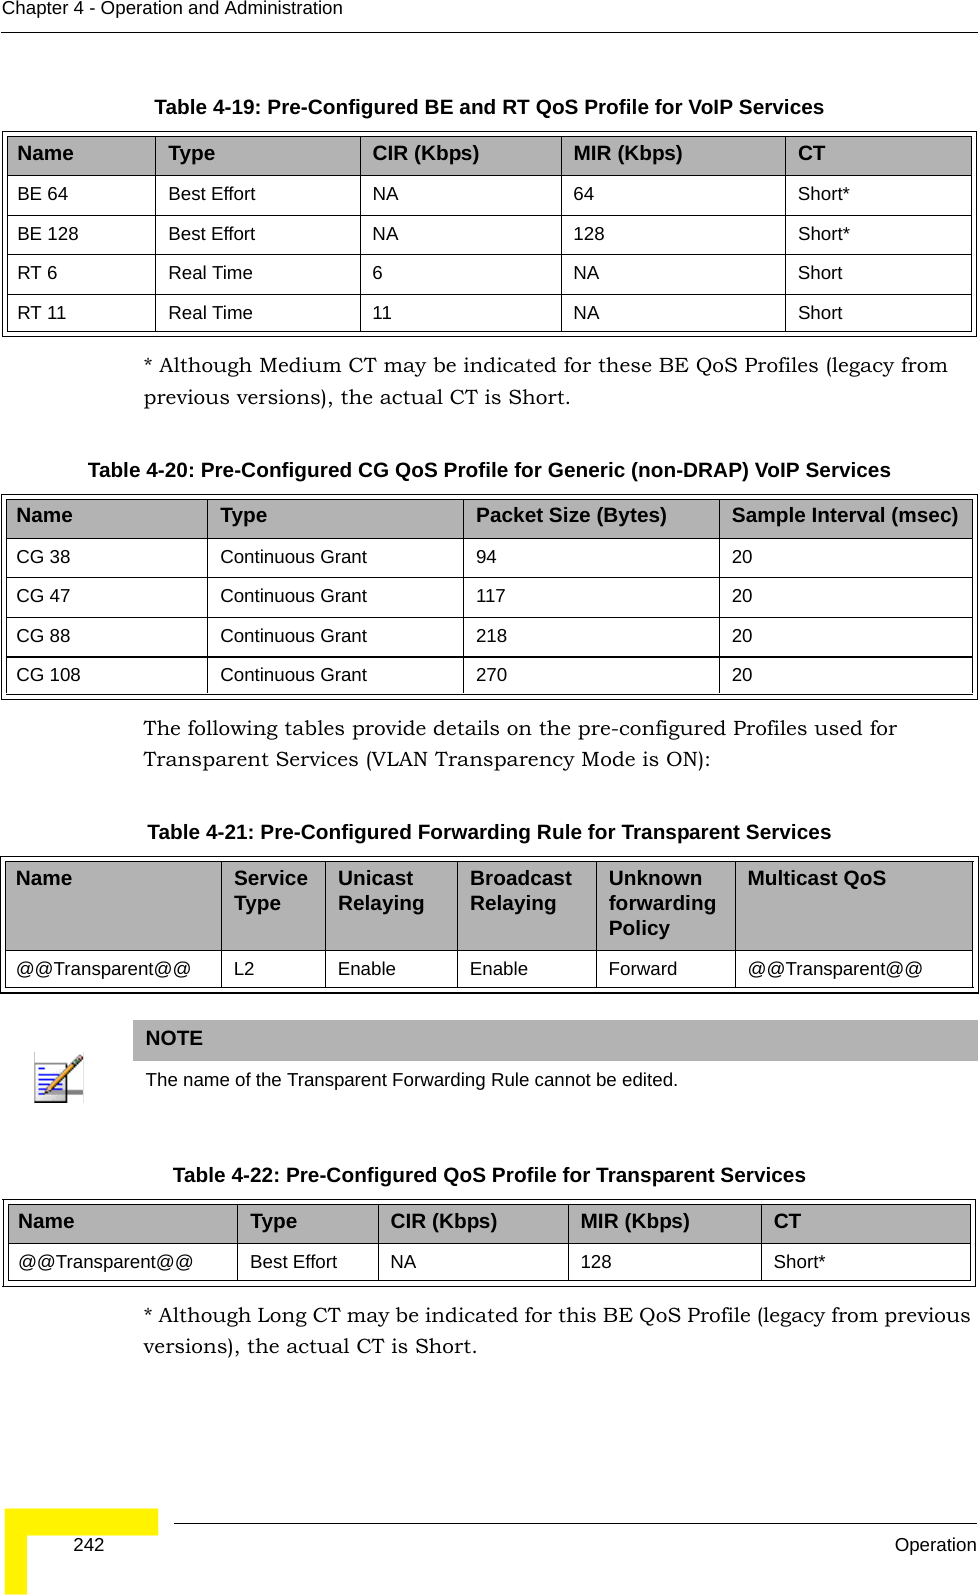  242 OperationChapter 4 - Operation and Administration * Although Medium CT may be indicated for these BE QoS Profiles (legacy from previous versions), the actual CT is Short.The following tables provide details on the pre-configured Profiles used for Transparent Services (VLAN Transparency Mode is ON):* Although Long CT may be indicated for this BE QoS Profile (legacy from previous versions), the actual CT is Short.Table 4-19: Pre-Configured BE and RT QoS Profile for VoIP ServicesName Type CIR (Kbps) MIR (Kbps) CTBE 64 Best Effort NA 64 Short*BE 128 Best Effort NA 128 Short*RT 6 Real Time 6 NA ShortRT 11 Real Time 11 NA ShortTable 4-20: Pre-Configured CG QoS Profile for Generic (non-DRAP) VoIP ServicesName Type Packet Size (Bytes) Sample Interval (msec)CG 38 Continuous Grant 94 20CG 47 Continuous Grant 117 20CG 88 Continuous Grant 218 20CG 108 Continuous Grant 270 20Table 4-21: Pre-Configured Forwarding Rule for Transparent ServicesName Service Type Unicast Relaying Broadcast Relaying Unknown forwarding PolicyMulticast QoS@@Transparent@@ L2 Enable Enable  Forward @@Transparent@@NOTEThe name of the Transparent Forwarding Rule cannot be edited.Table 4-22: Pre-Configured QoS Profile for Transparent ServicesName Type CIR (Kbps) MIR (Kbps) CT@@Transparent@@ Best Effort NA 128 Short*